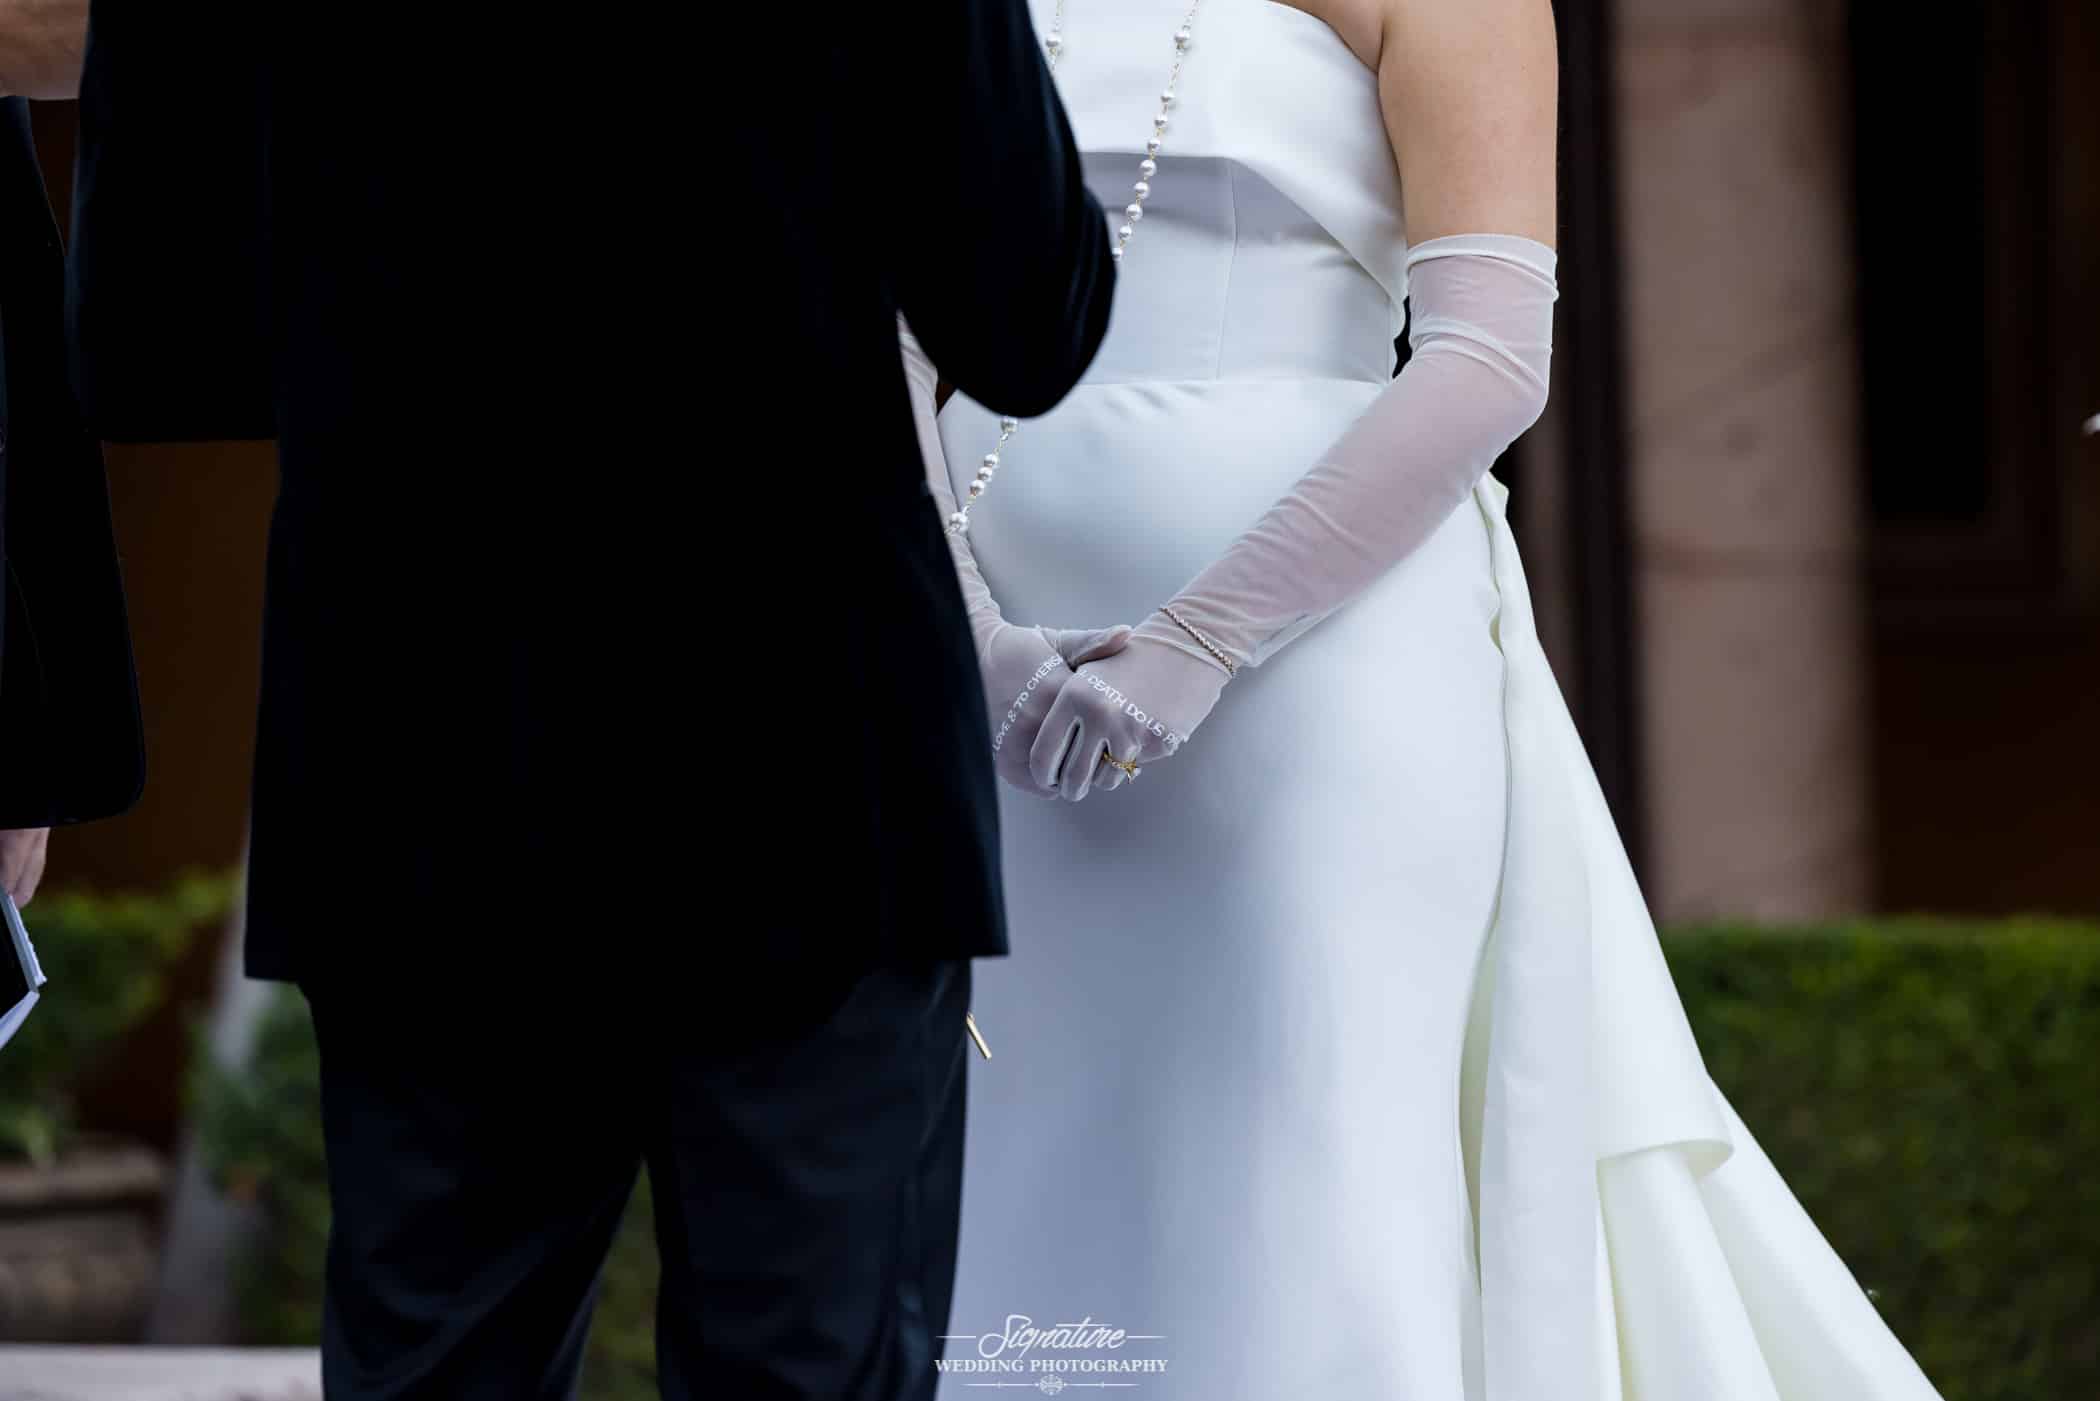 Bride's hands clasped during ceremony